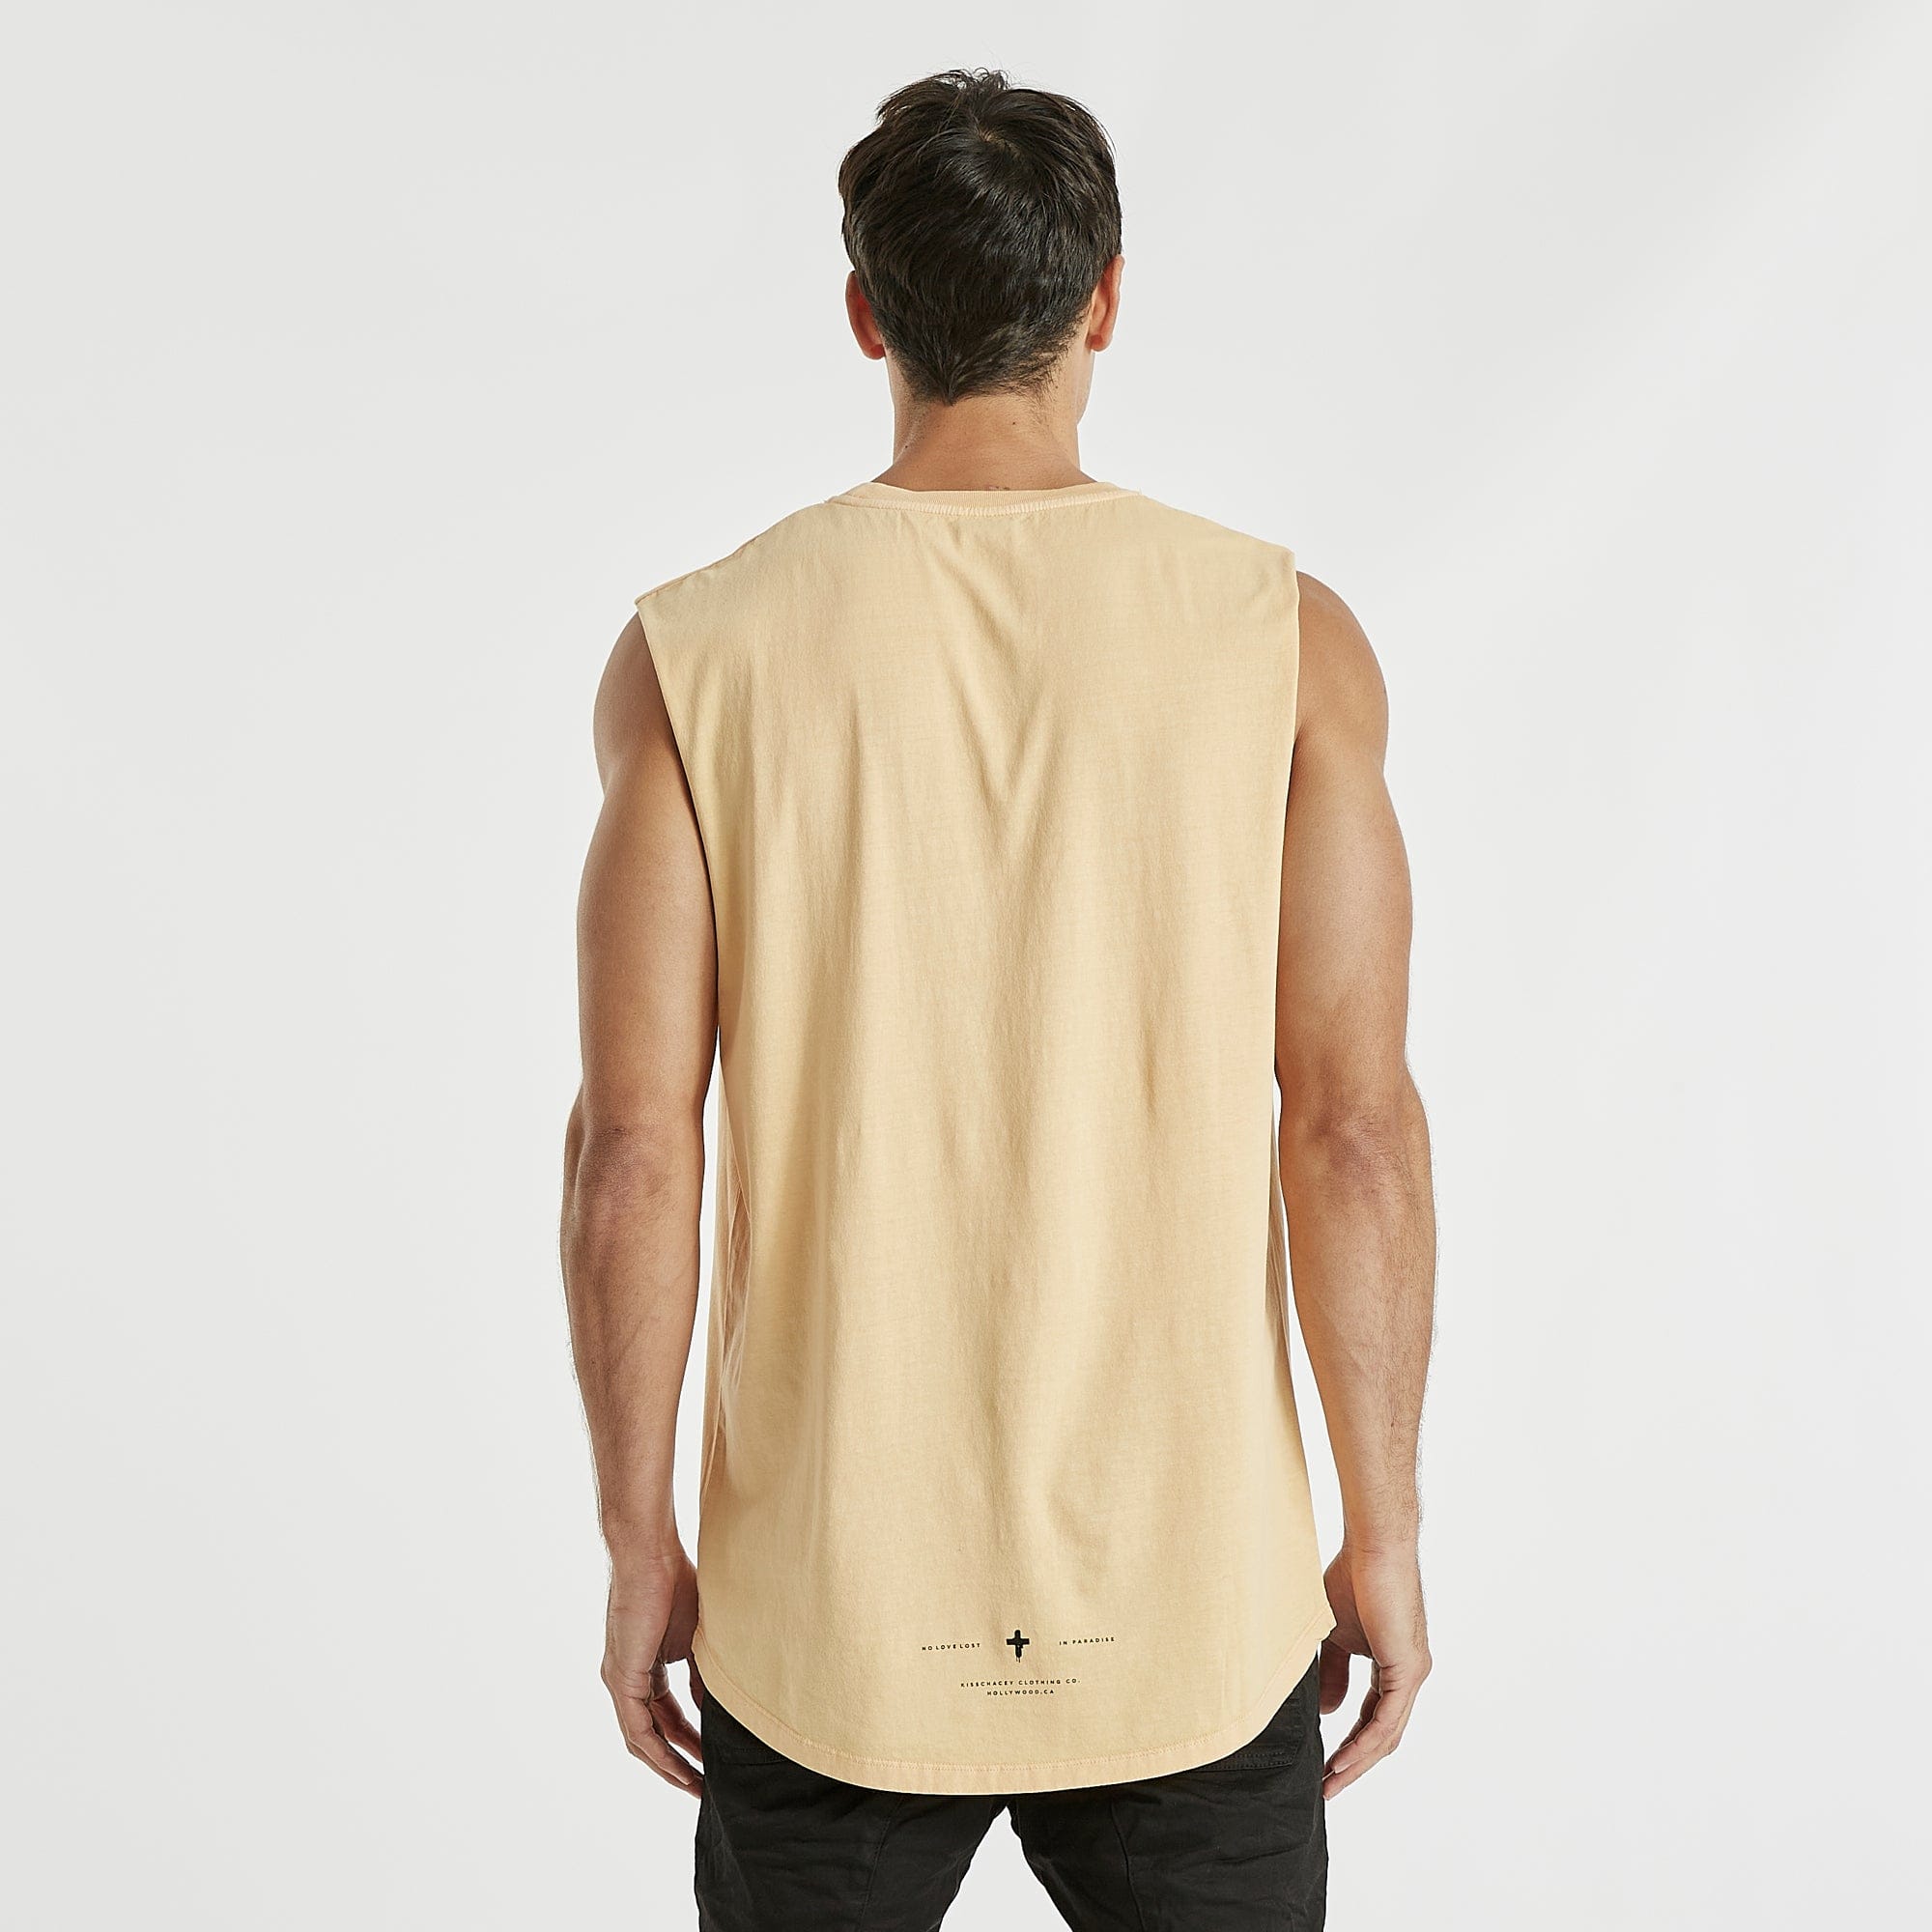 Missing Dual Curved Muscle Tee Pigment Sunburst